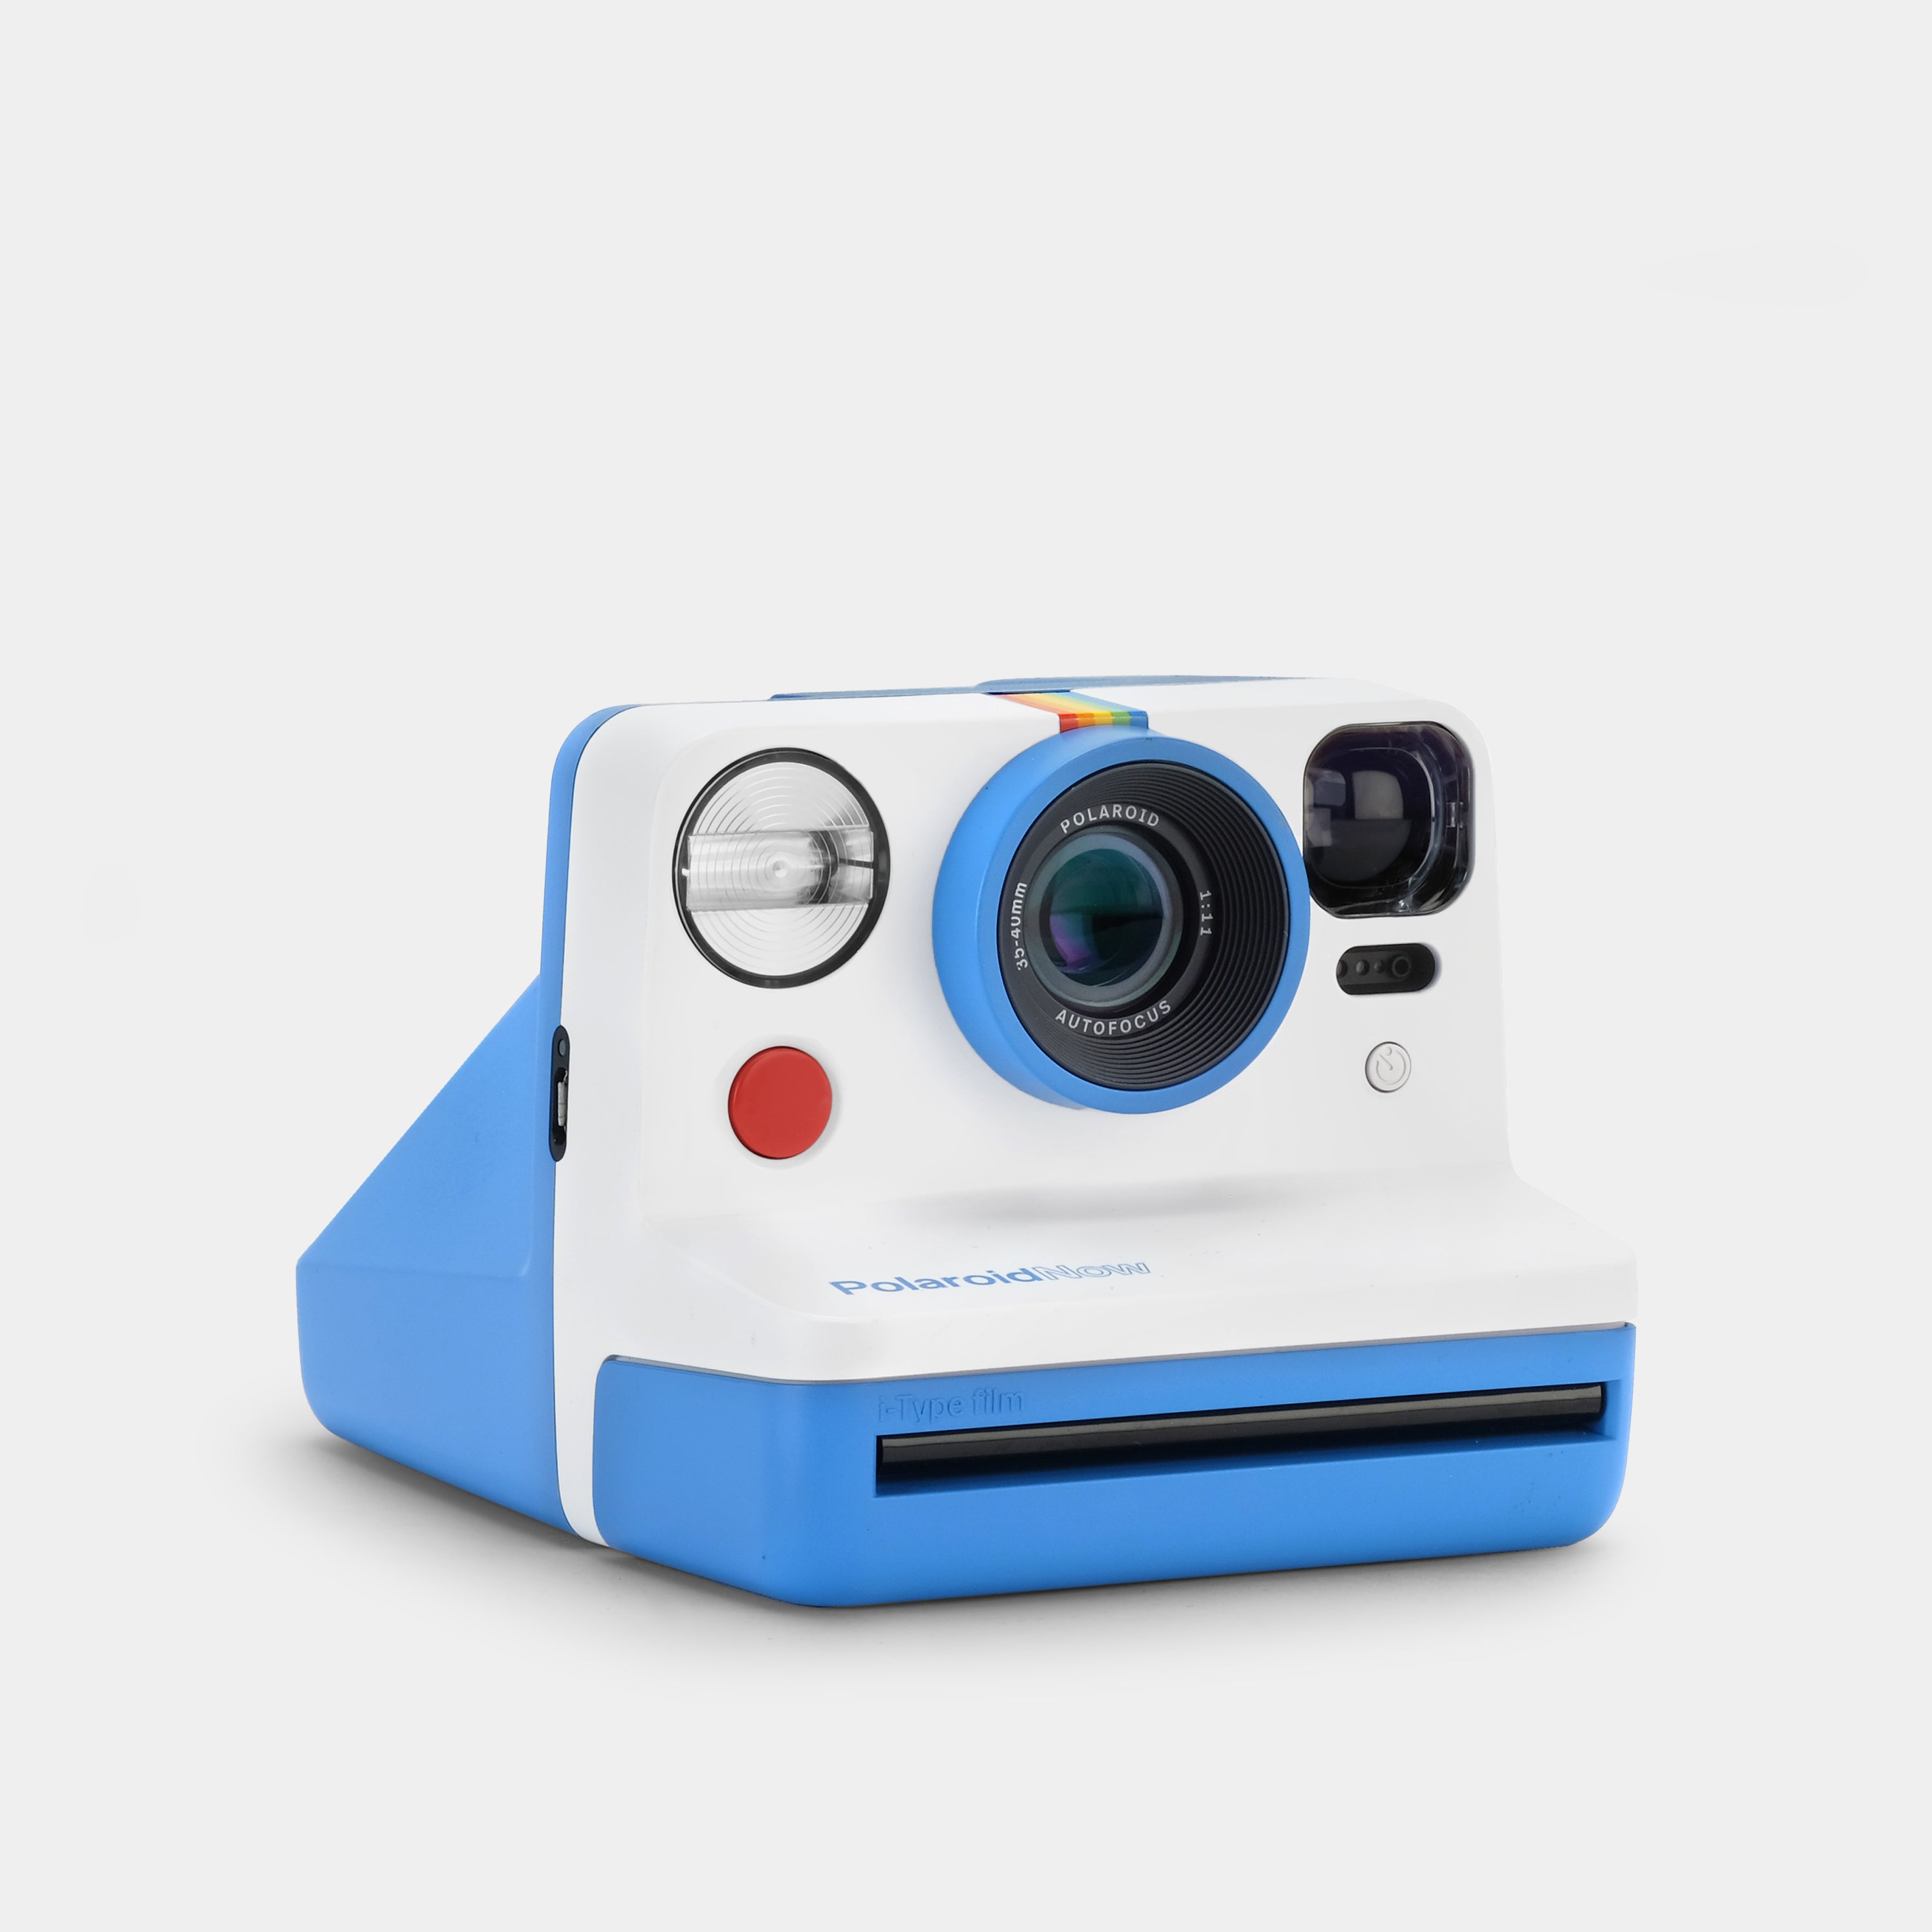 Polaroid i-Type Now White and Blue Instant Film Camera - Refurbished